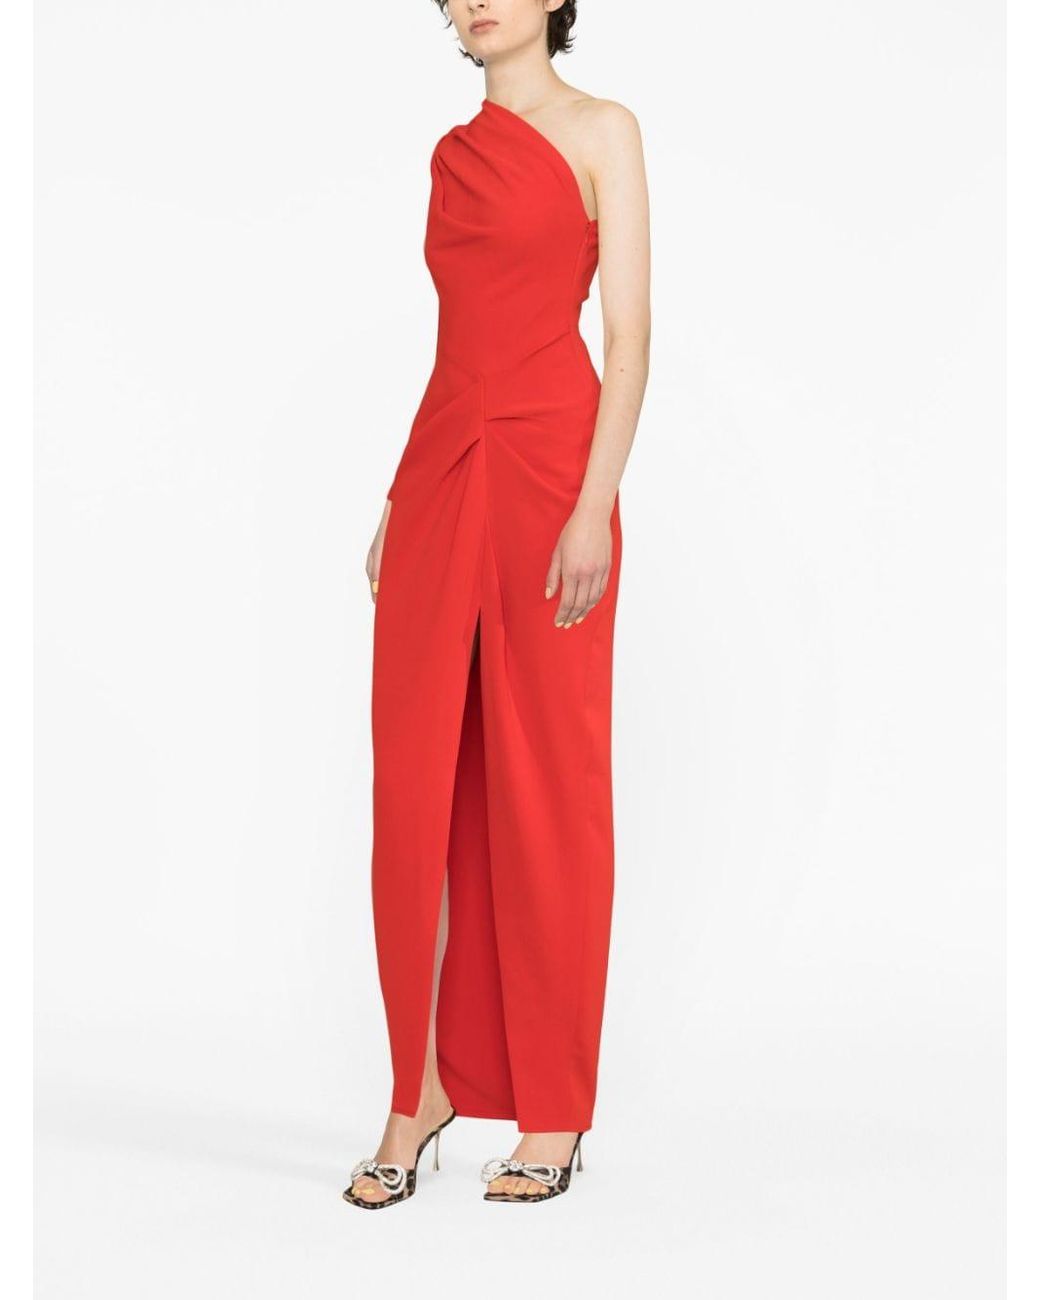 Solace London Lily One-shoulder Maxi Dress in Red | Lyst